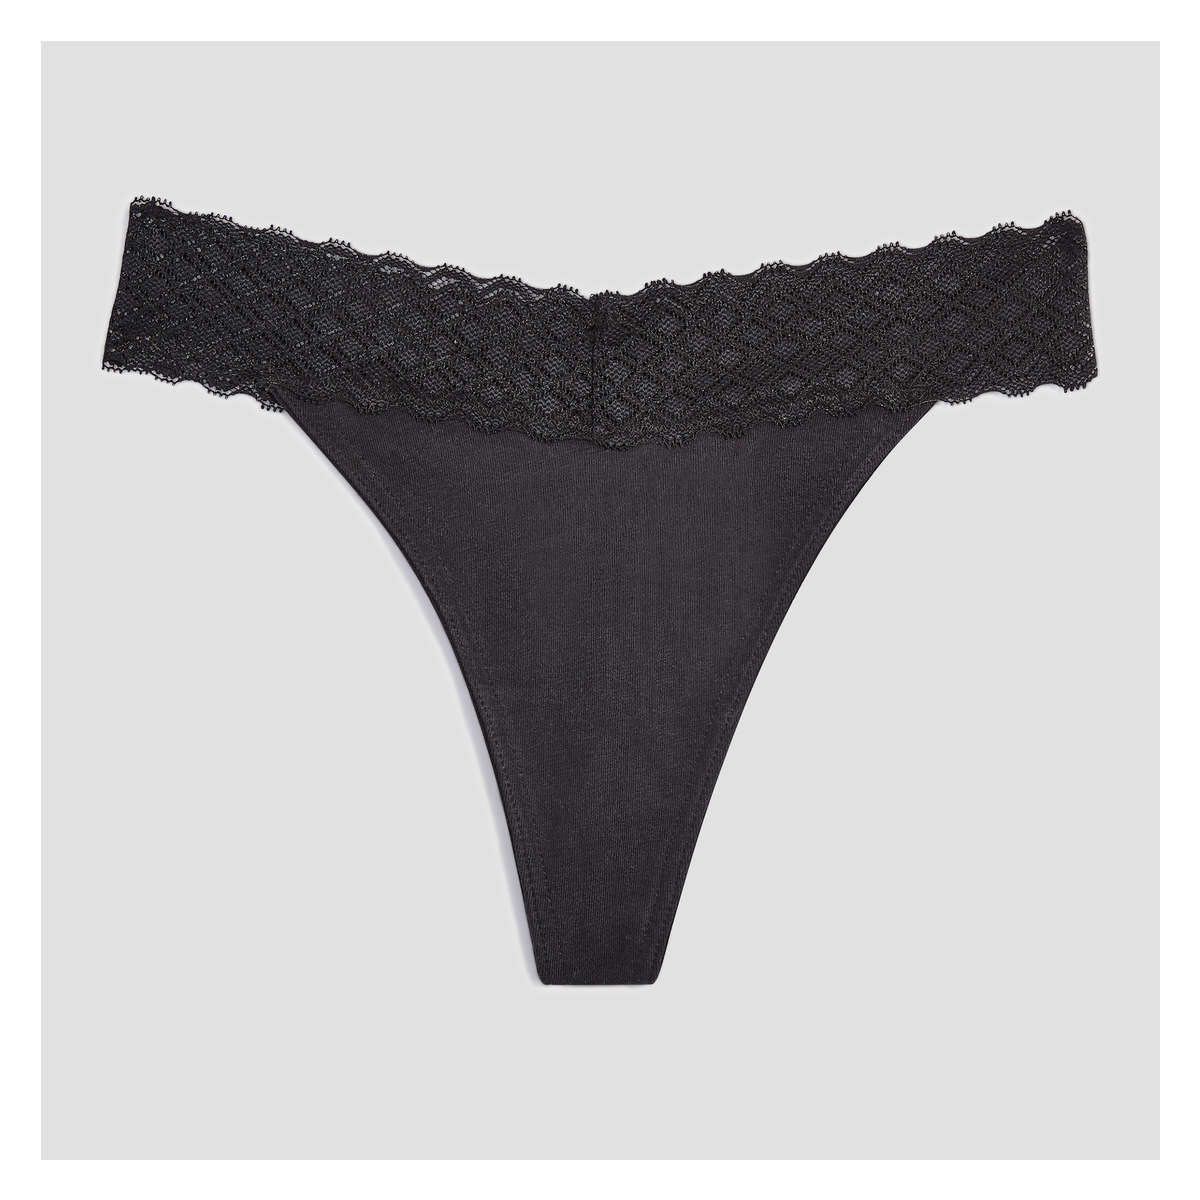 Lace Trim Thong in Black from Joe Fresh